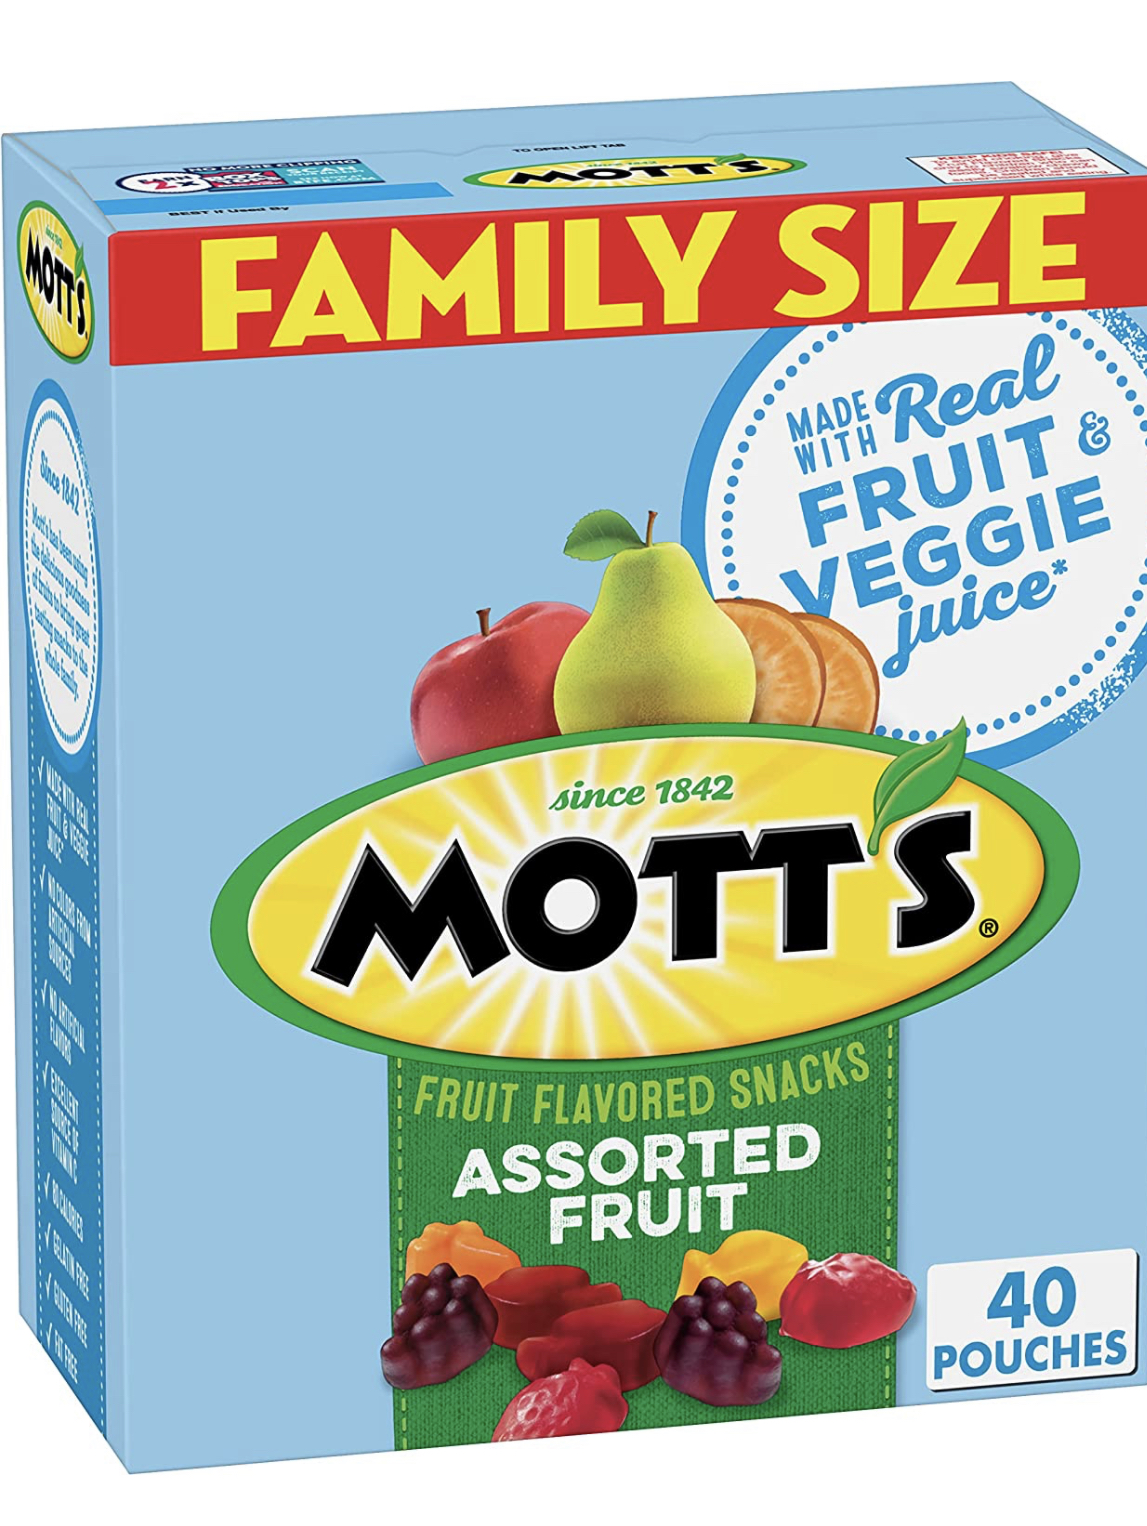 Mott's Fruit Flavored Snacks, Assorted Fruit, Pouches, 0.8 oz, 40 ct - $5.79